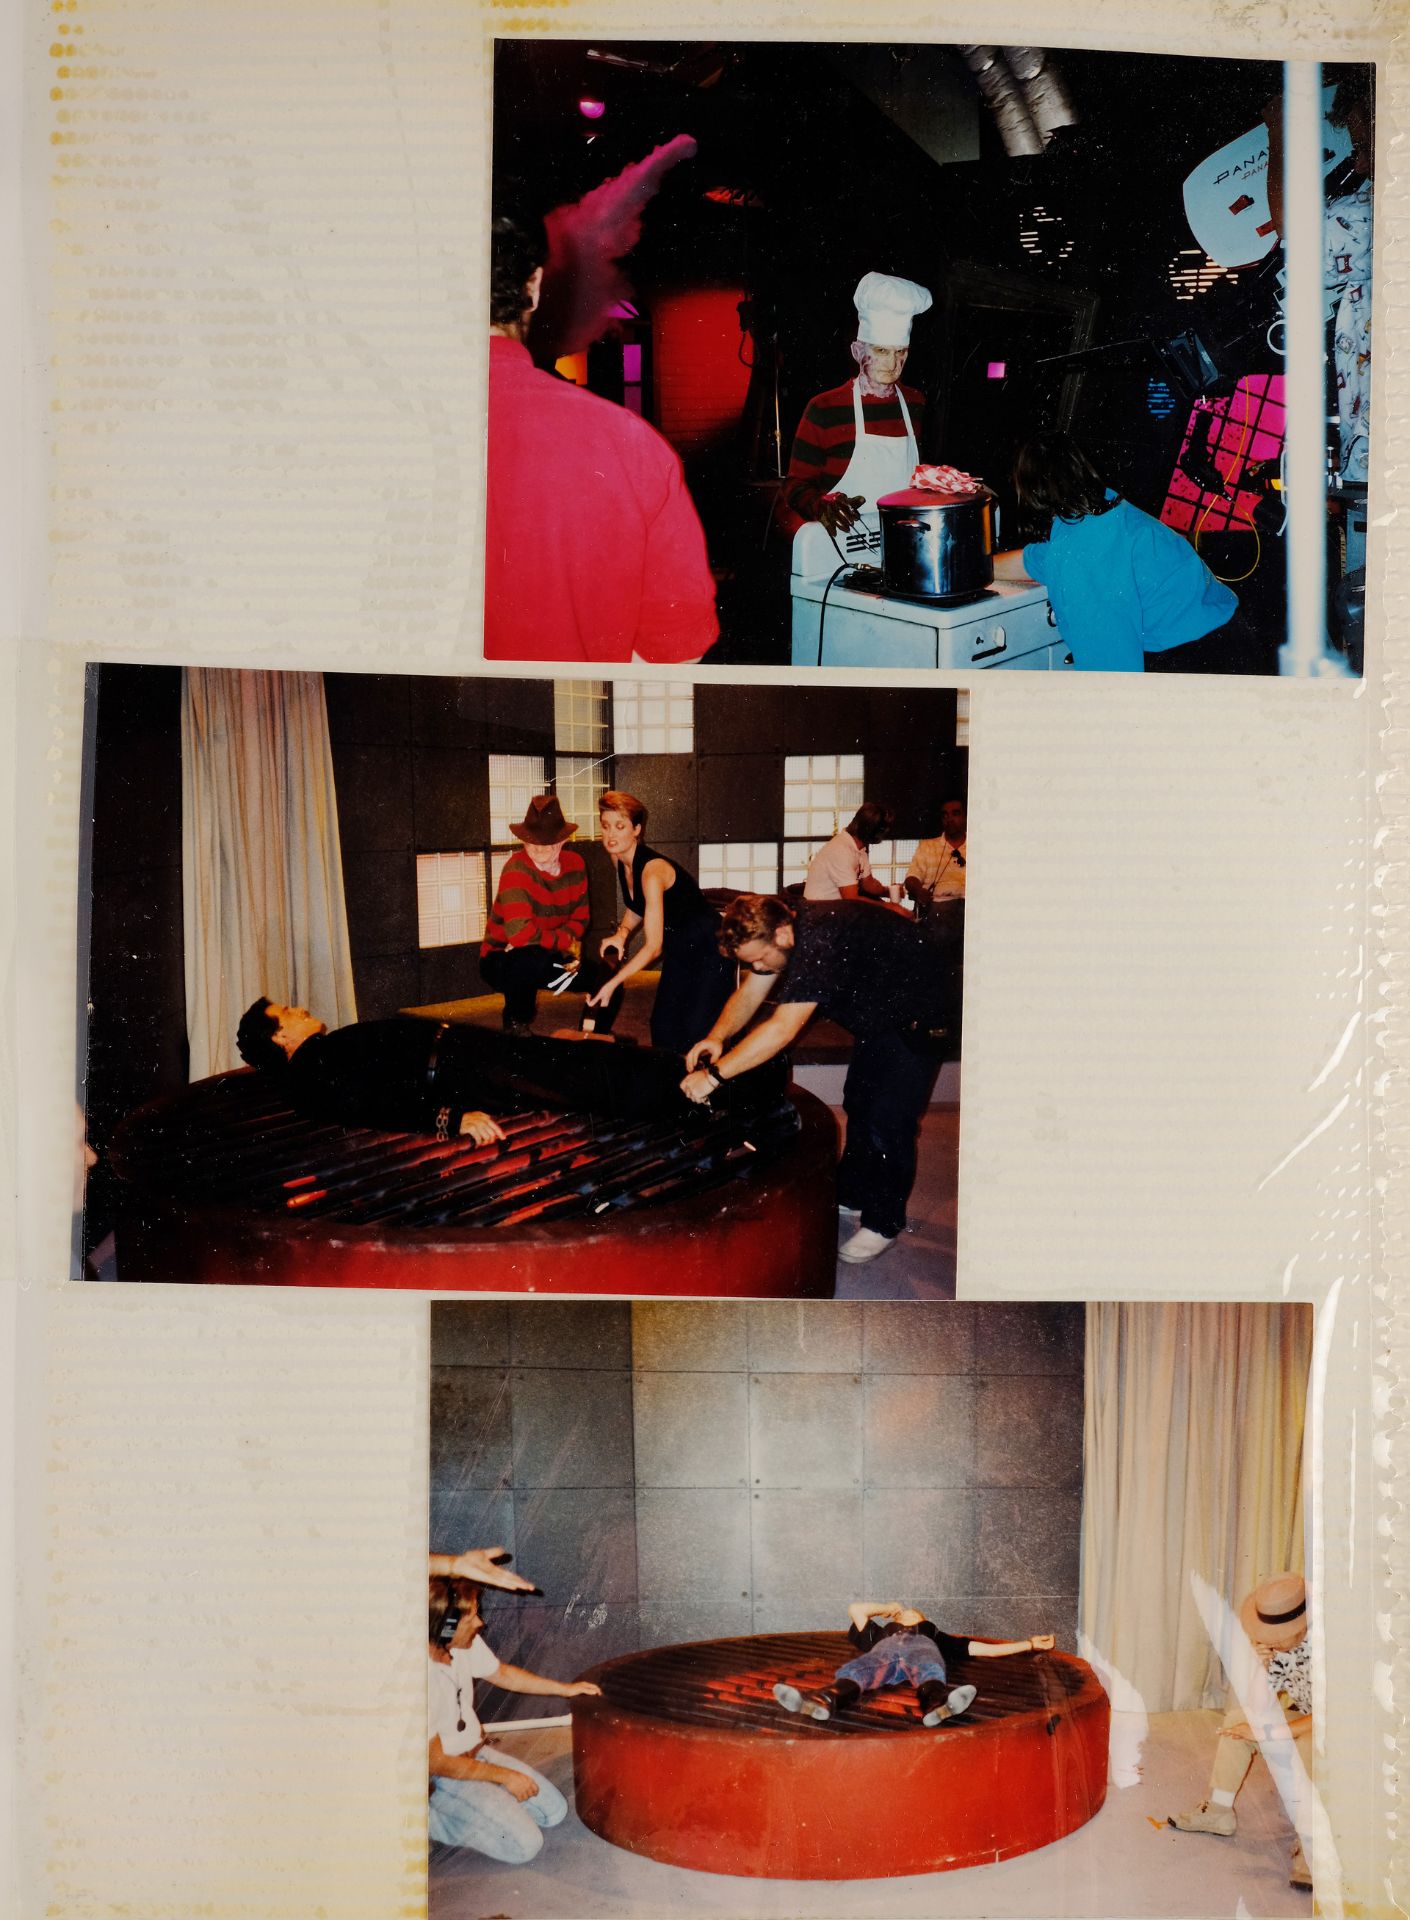 TALES FROM THE CRYPT (1989-1996) - Set of Six Continuity Photo Binders - Bild 4 aus 9